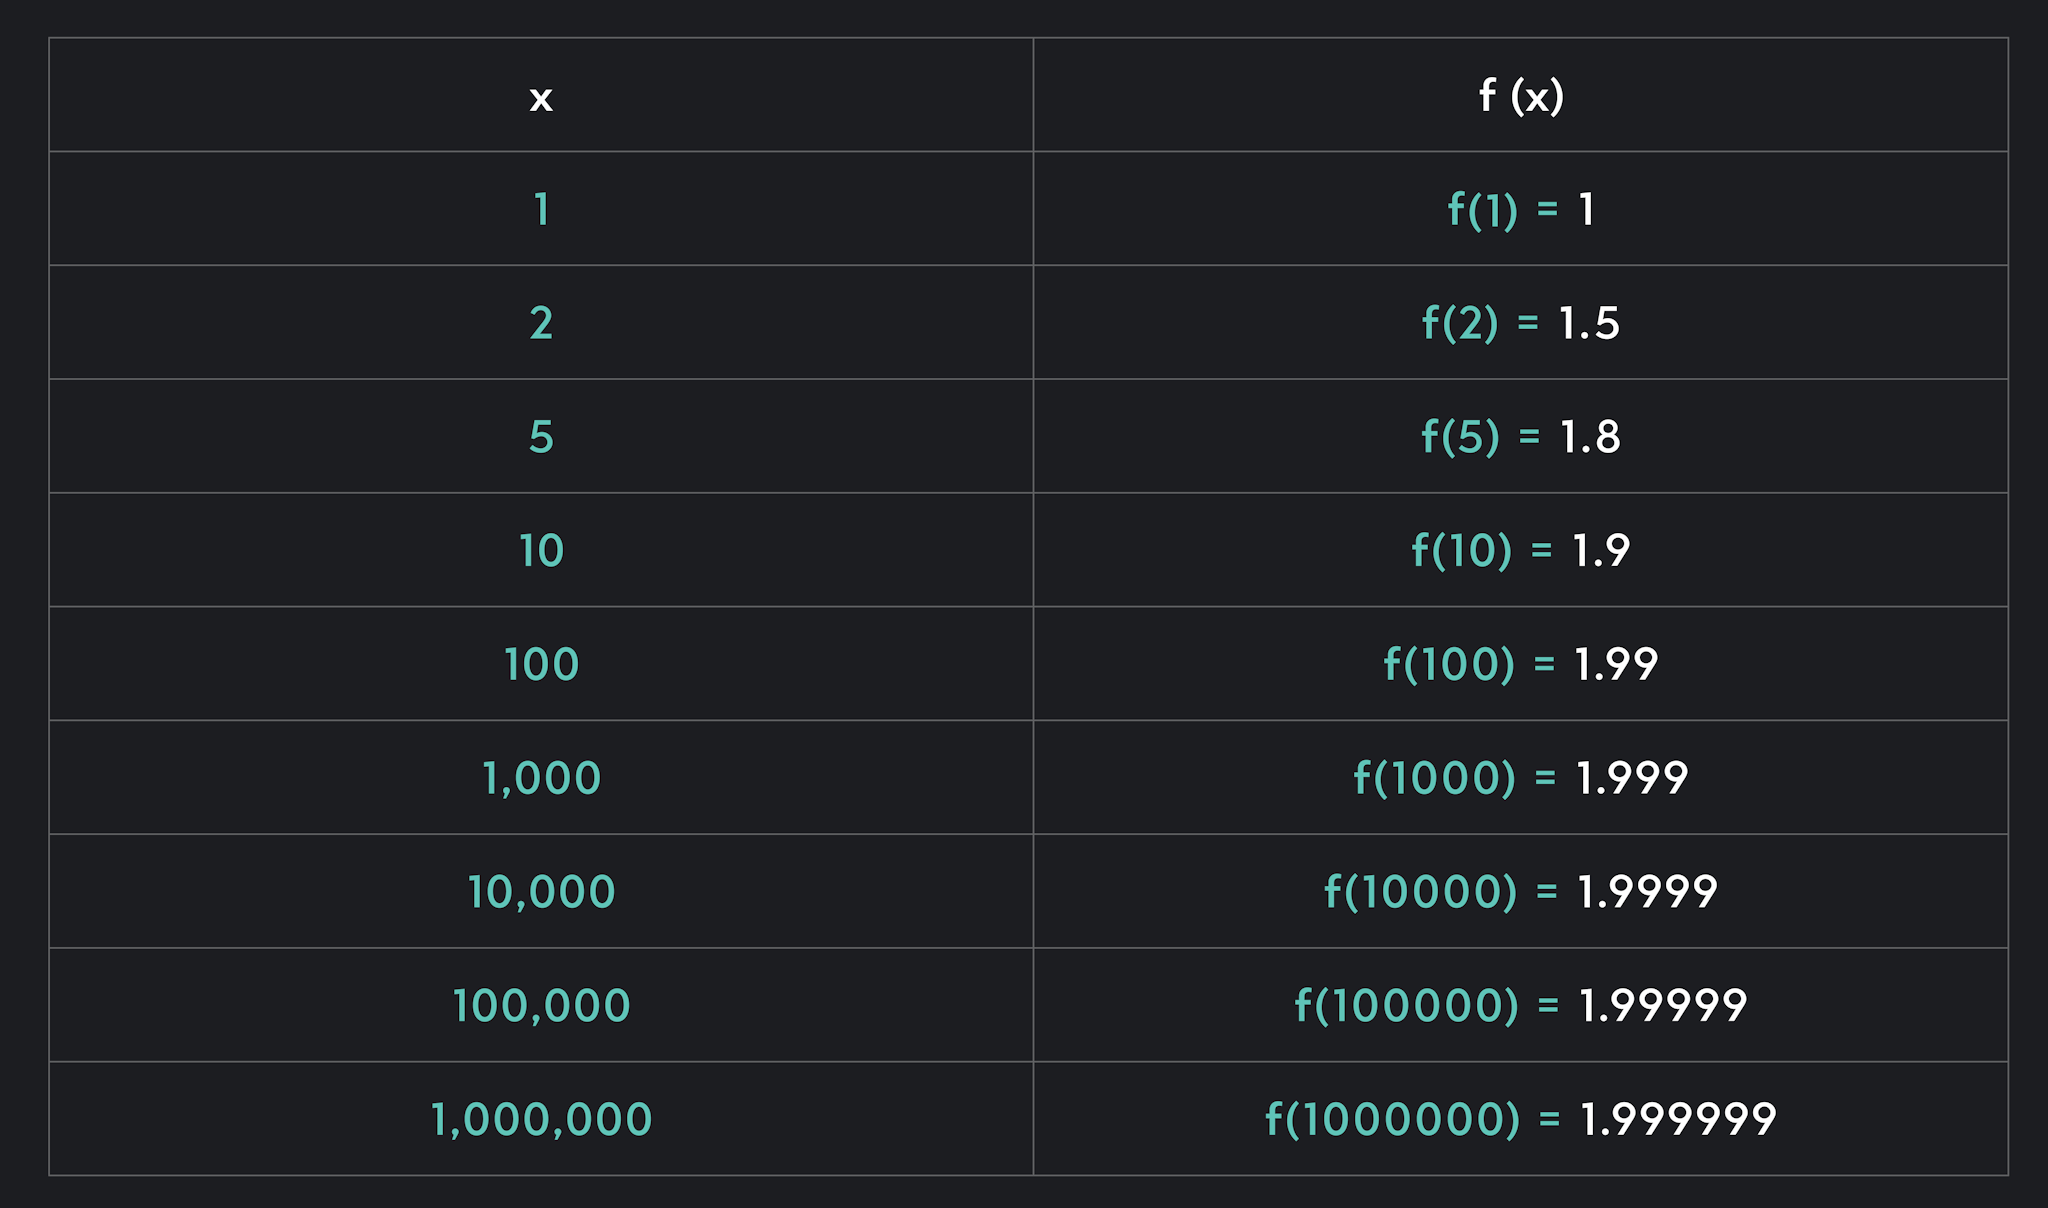 Function Chart for limit as x approaches infinity